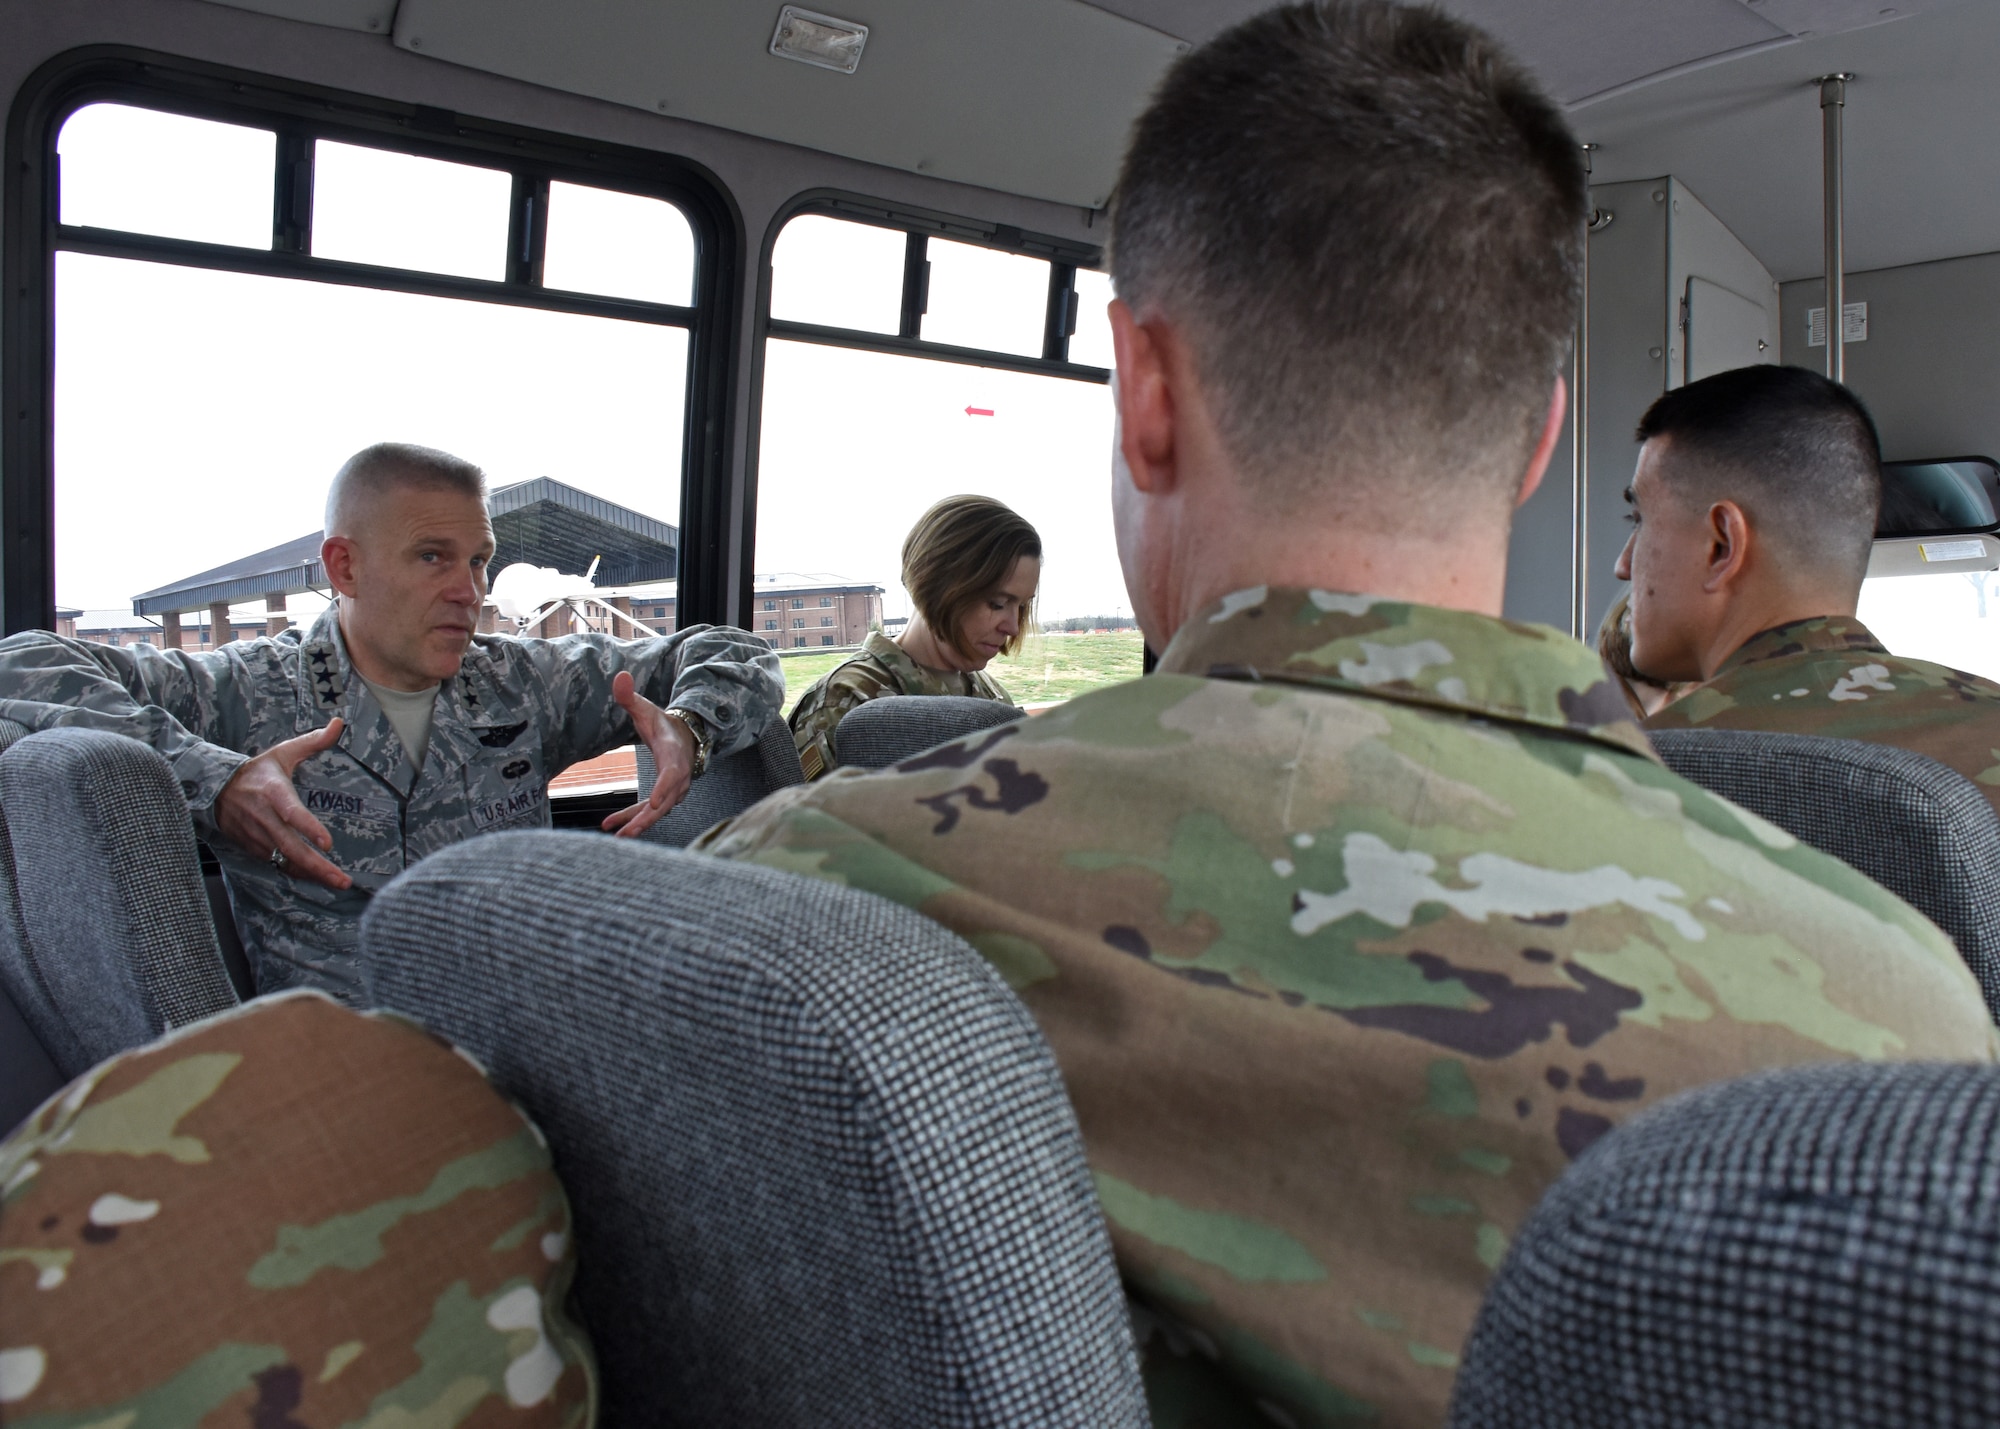 U.S. Air Force Lt. Gen. Steve Kwast, commander of Air Education and Training Command, speaks with Goodfellow leaders while traveling to San Angelo March 20, 2019. During the tour, Kwast visited the San Angelo Fire Department Station No. 7 and Angelo State University and learned more about partnerships between members at Goodfellow AFB and local groups. (U.S. Air Force photo by Airman 1st Class Zachary Chapman/Released)